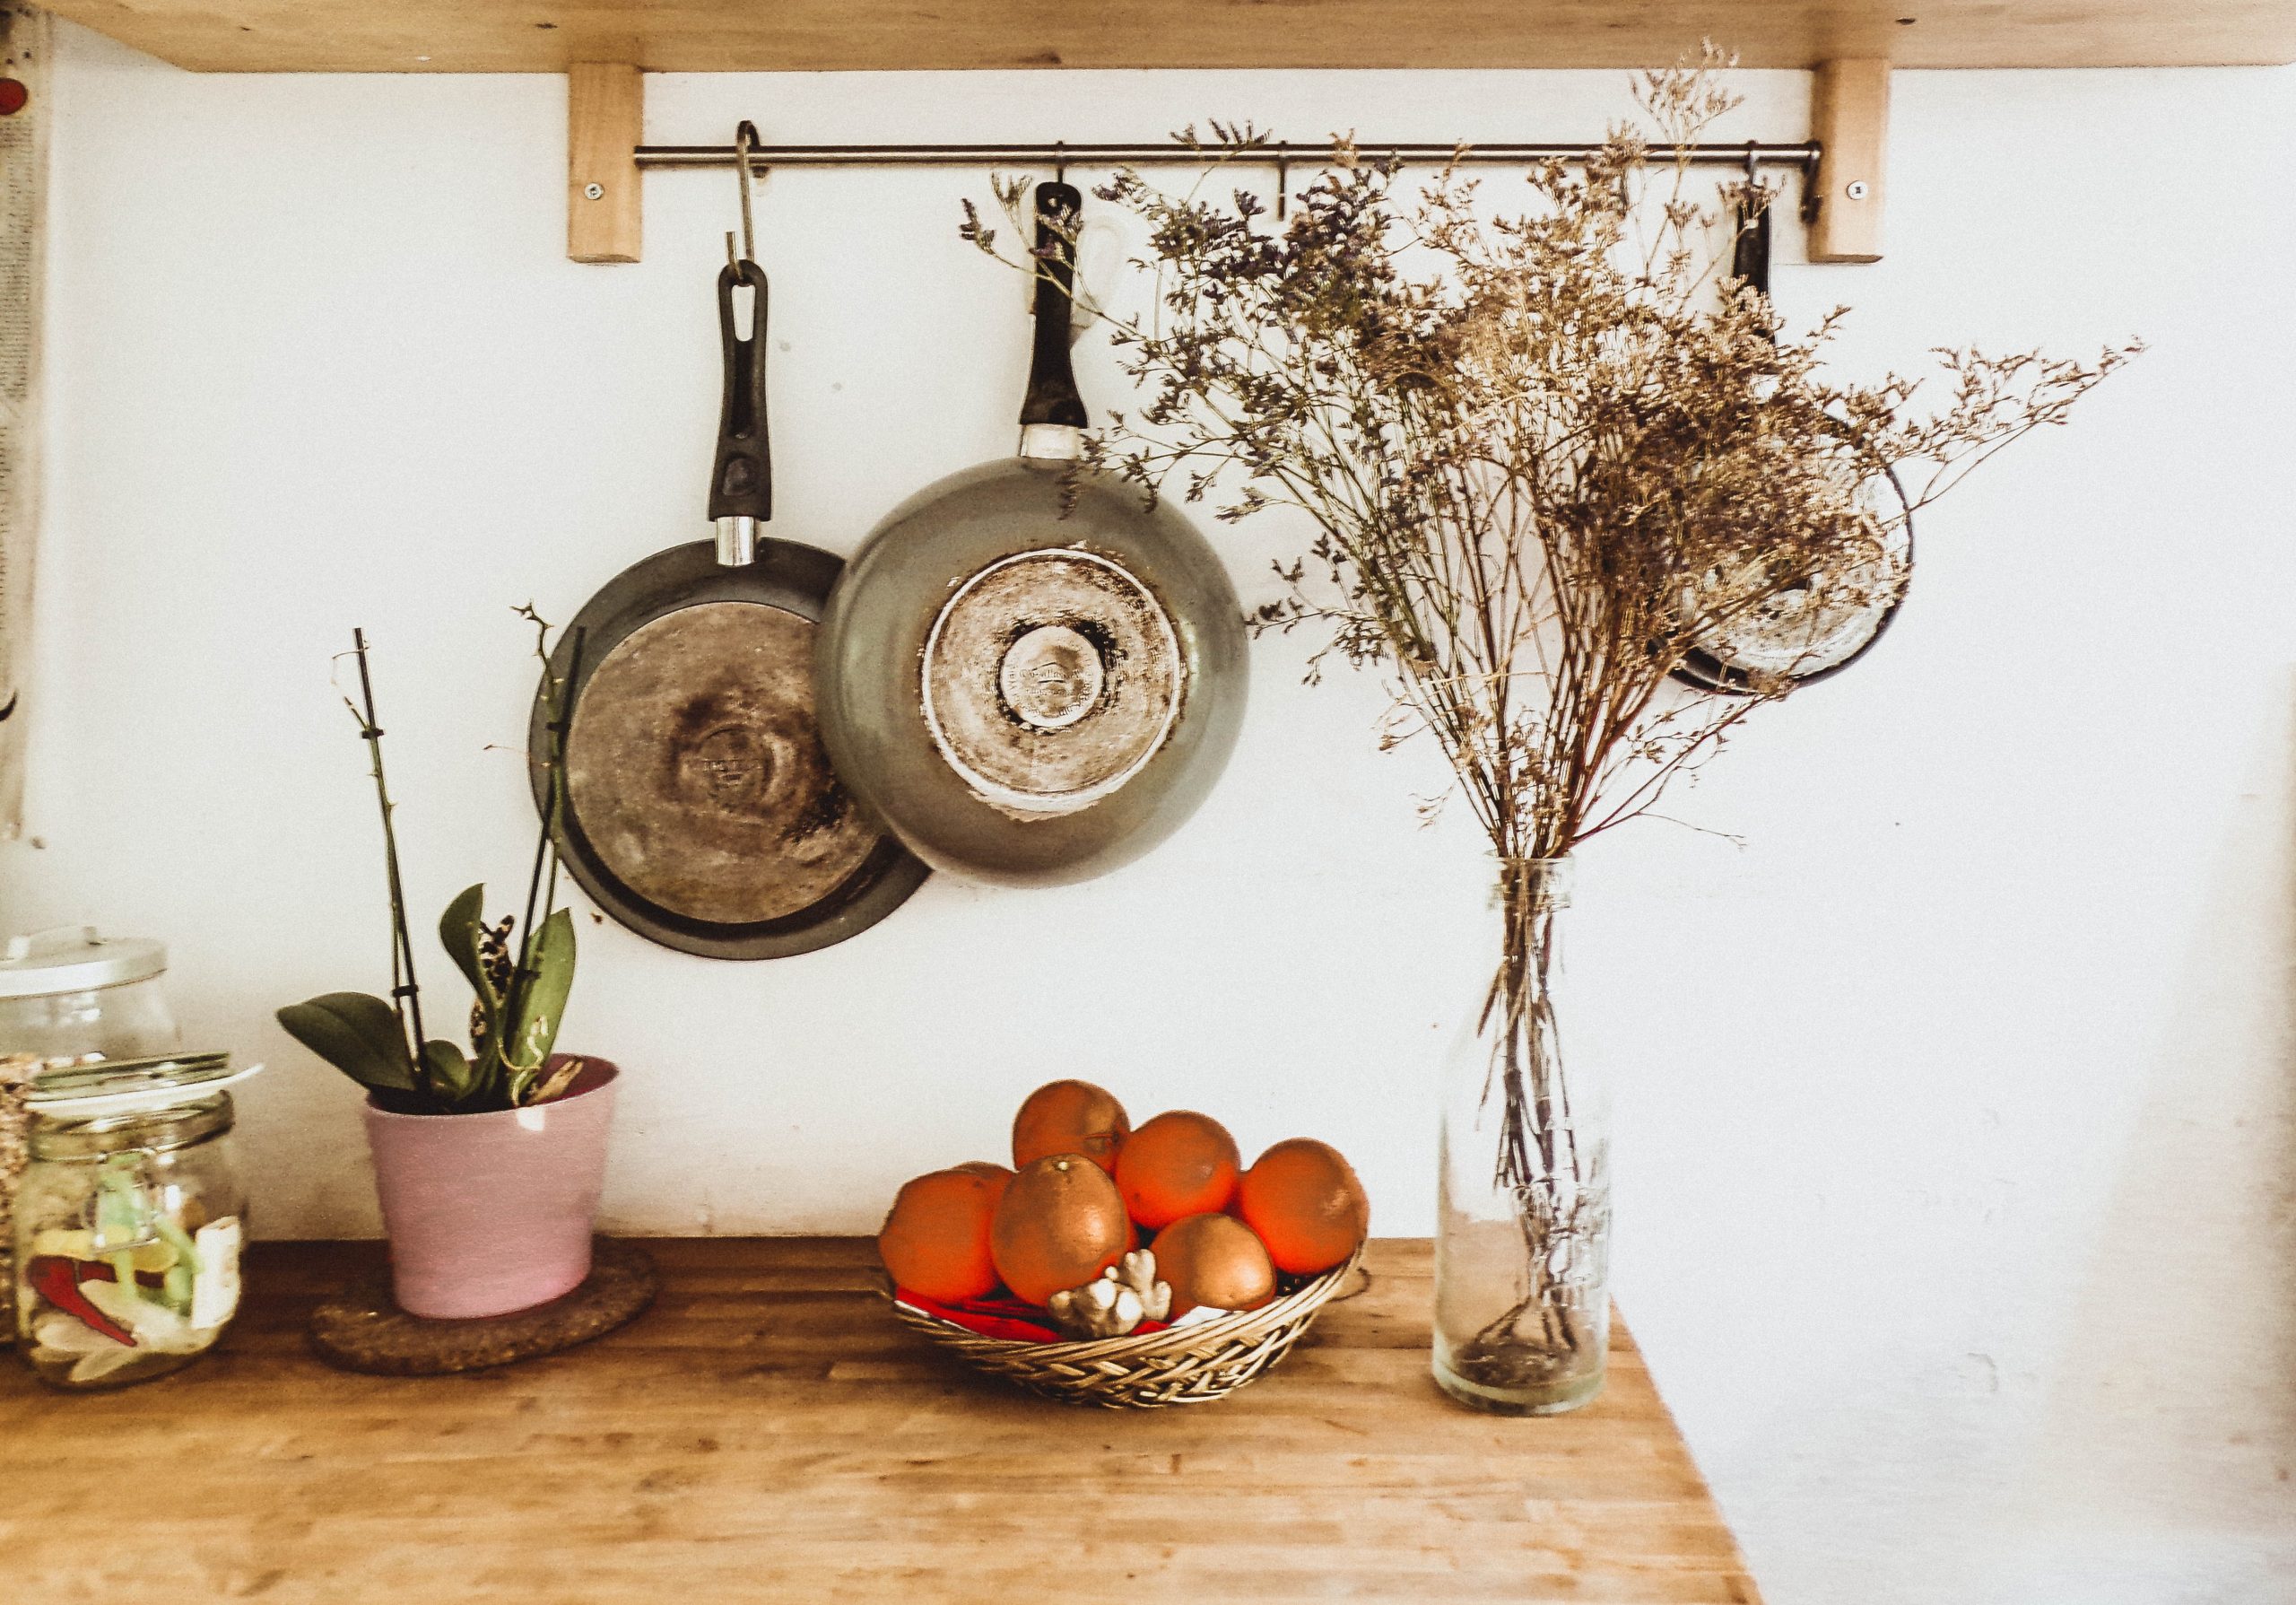 two pans hanging on the wall above a wooden surface, holding pots of various items; Finishing Touches for Your Home Design